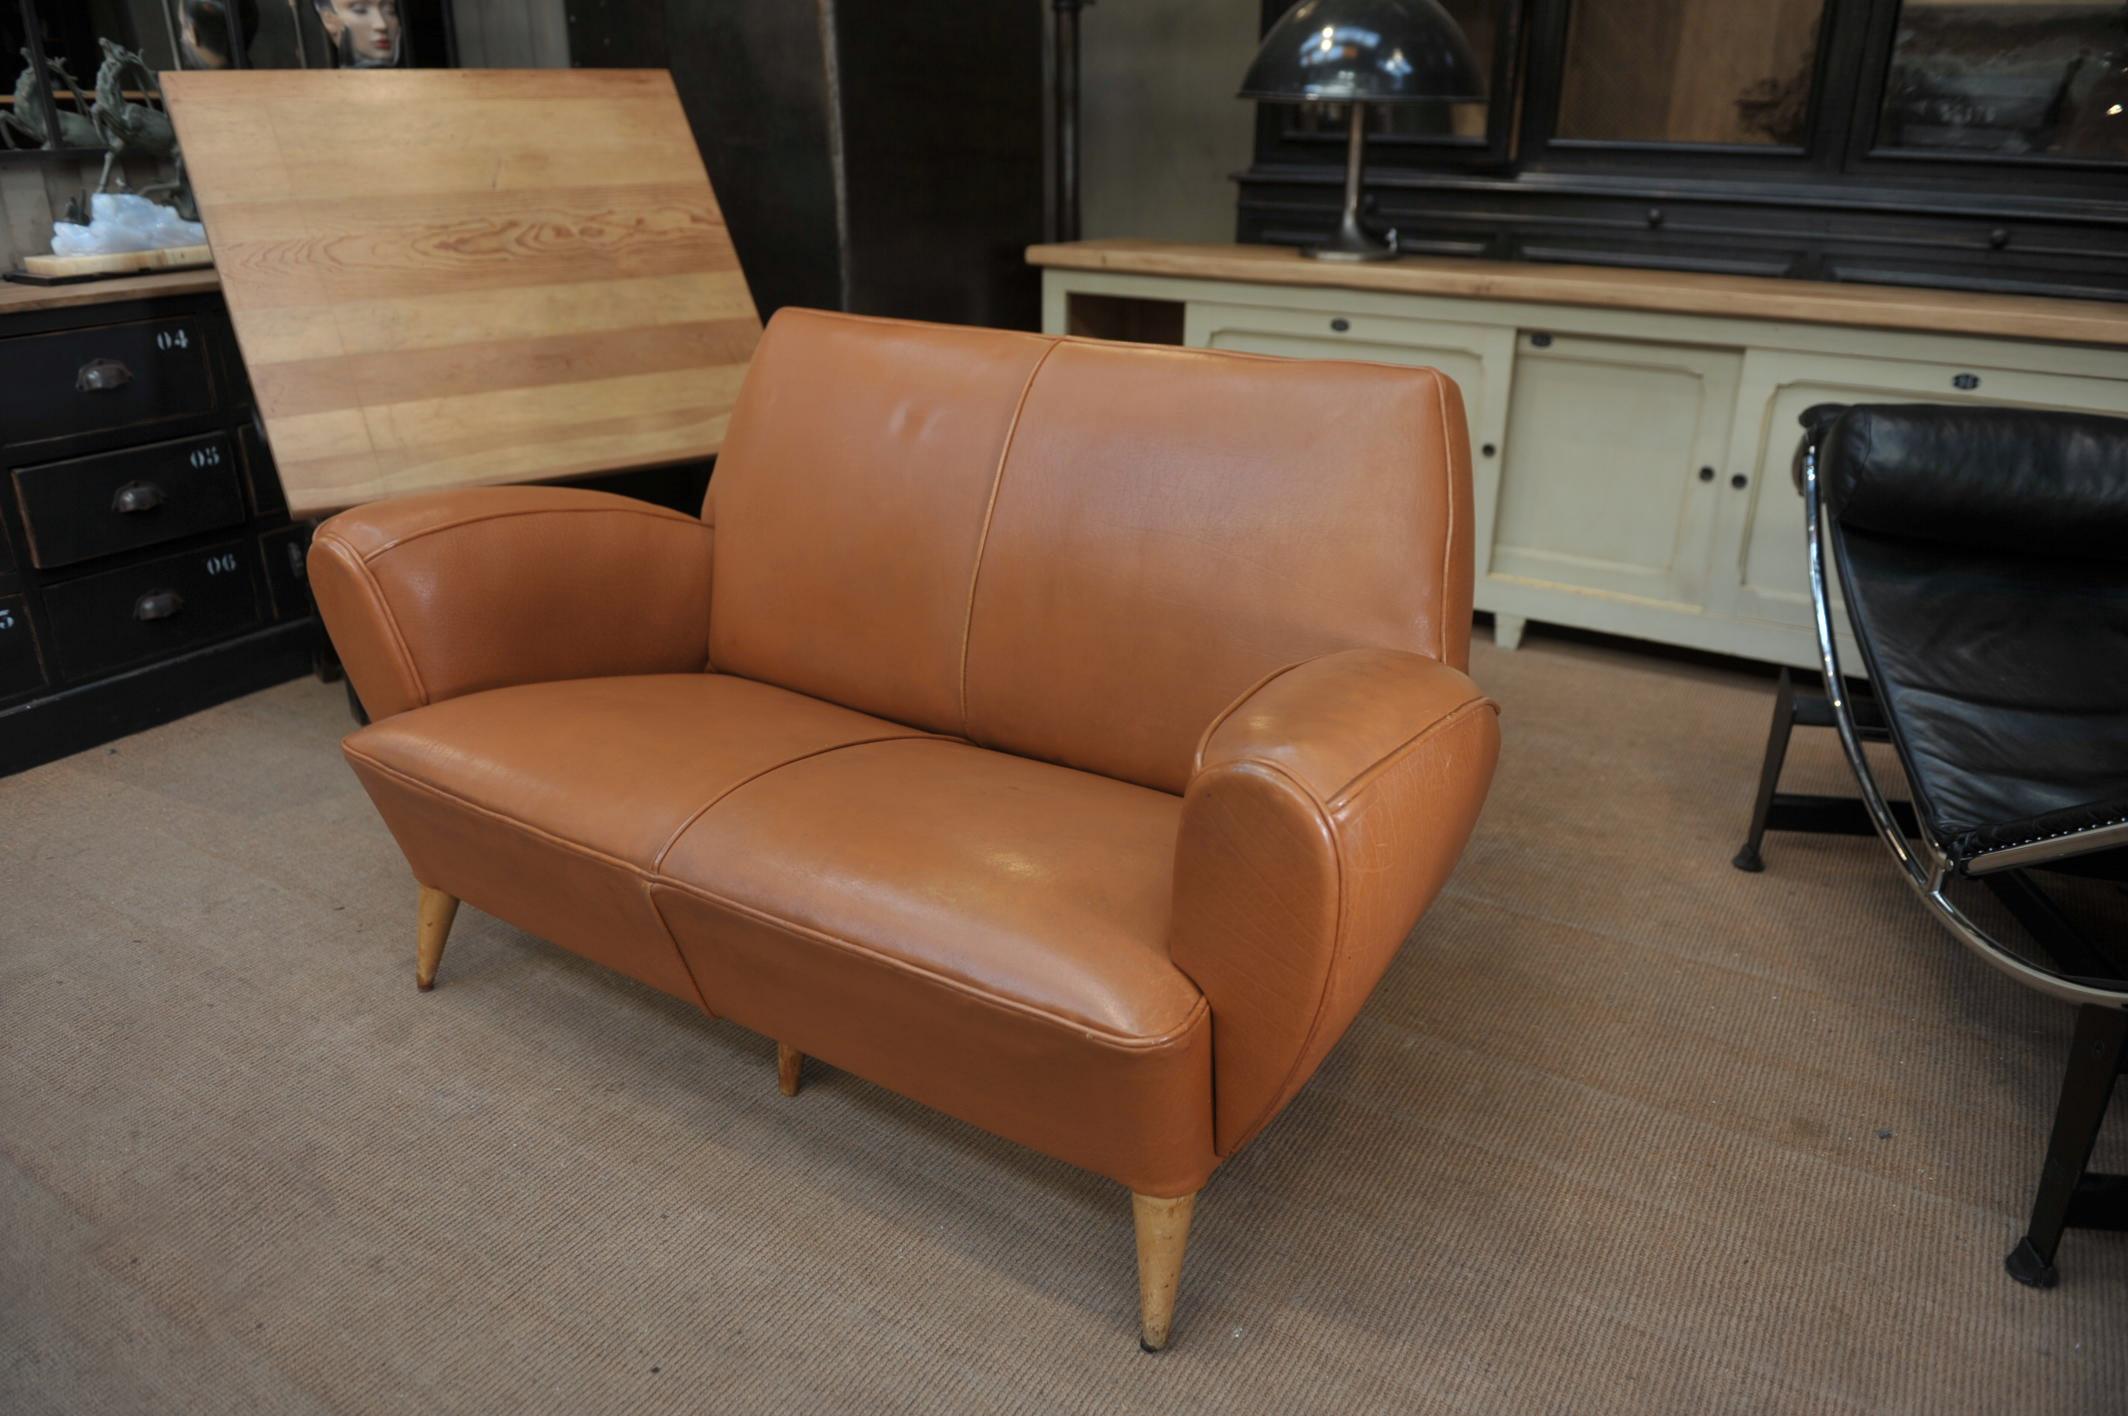 Club sofa canapé by Erton Paris original excellent condition leather very sturdy and comfortable, circa 1950.